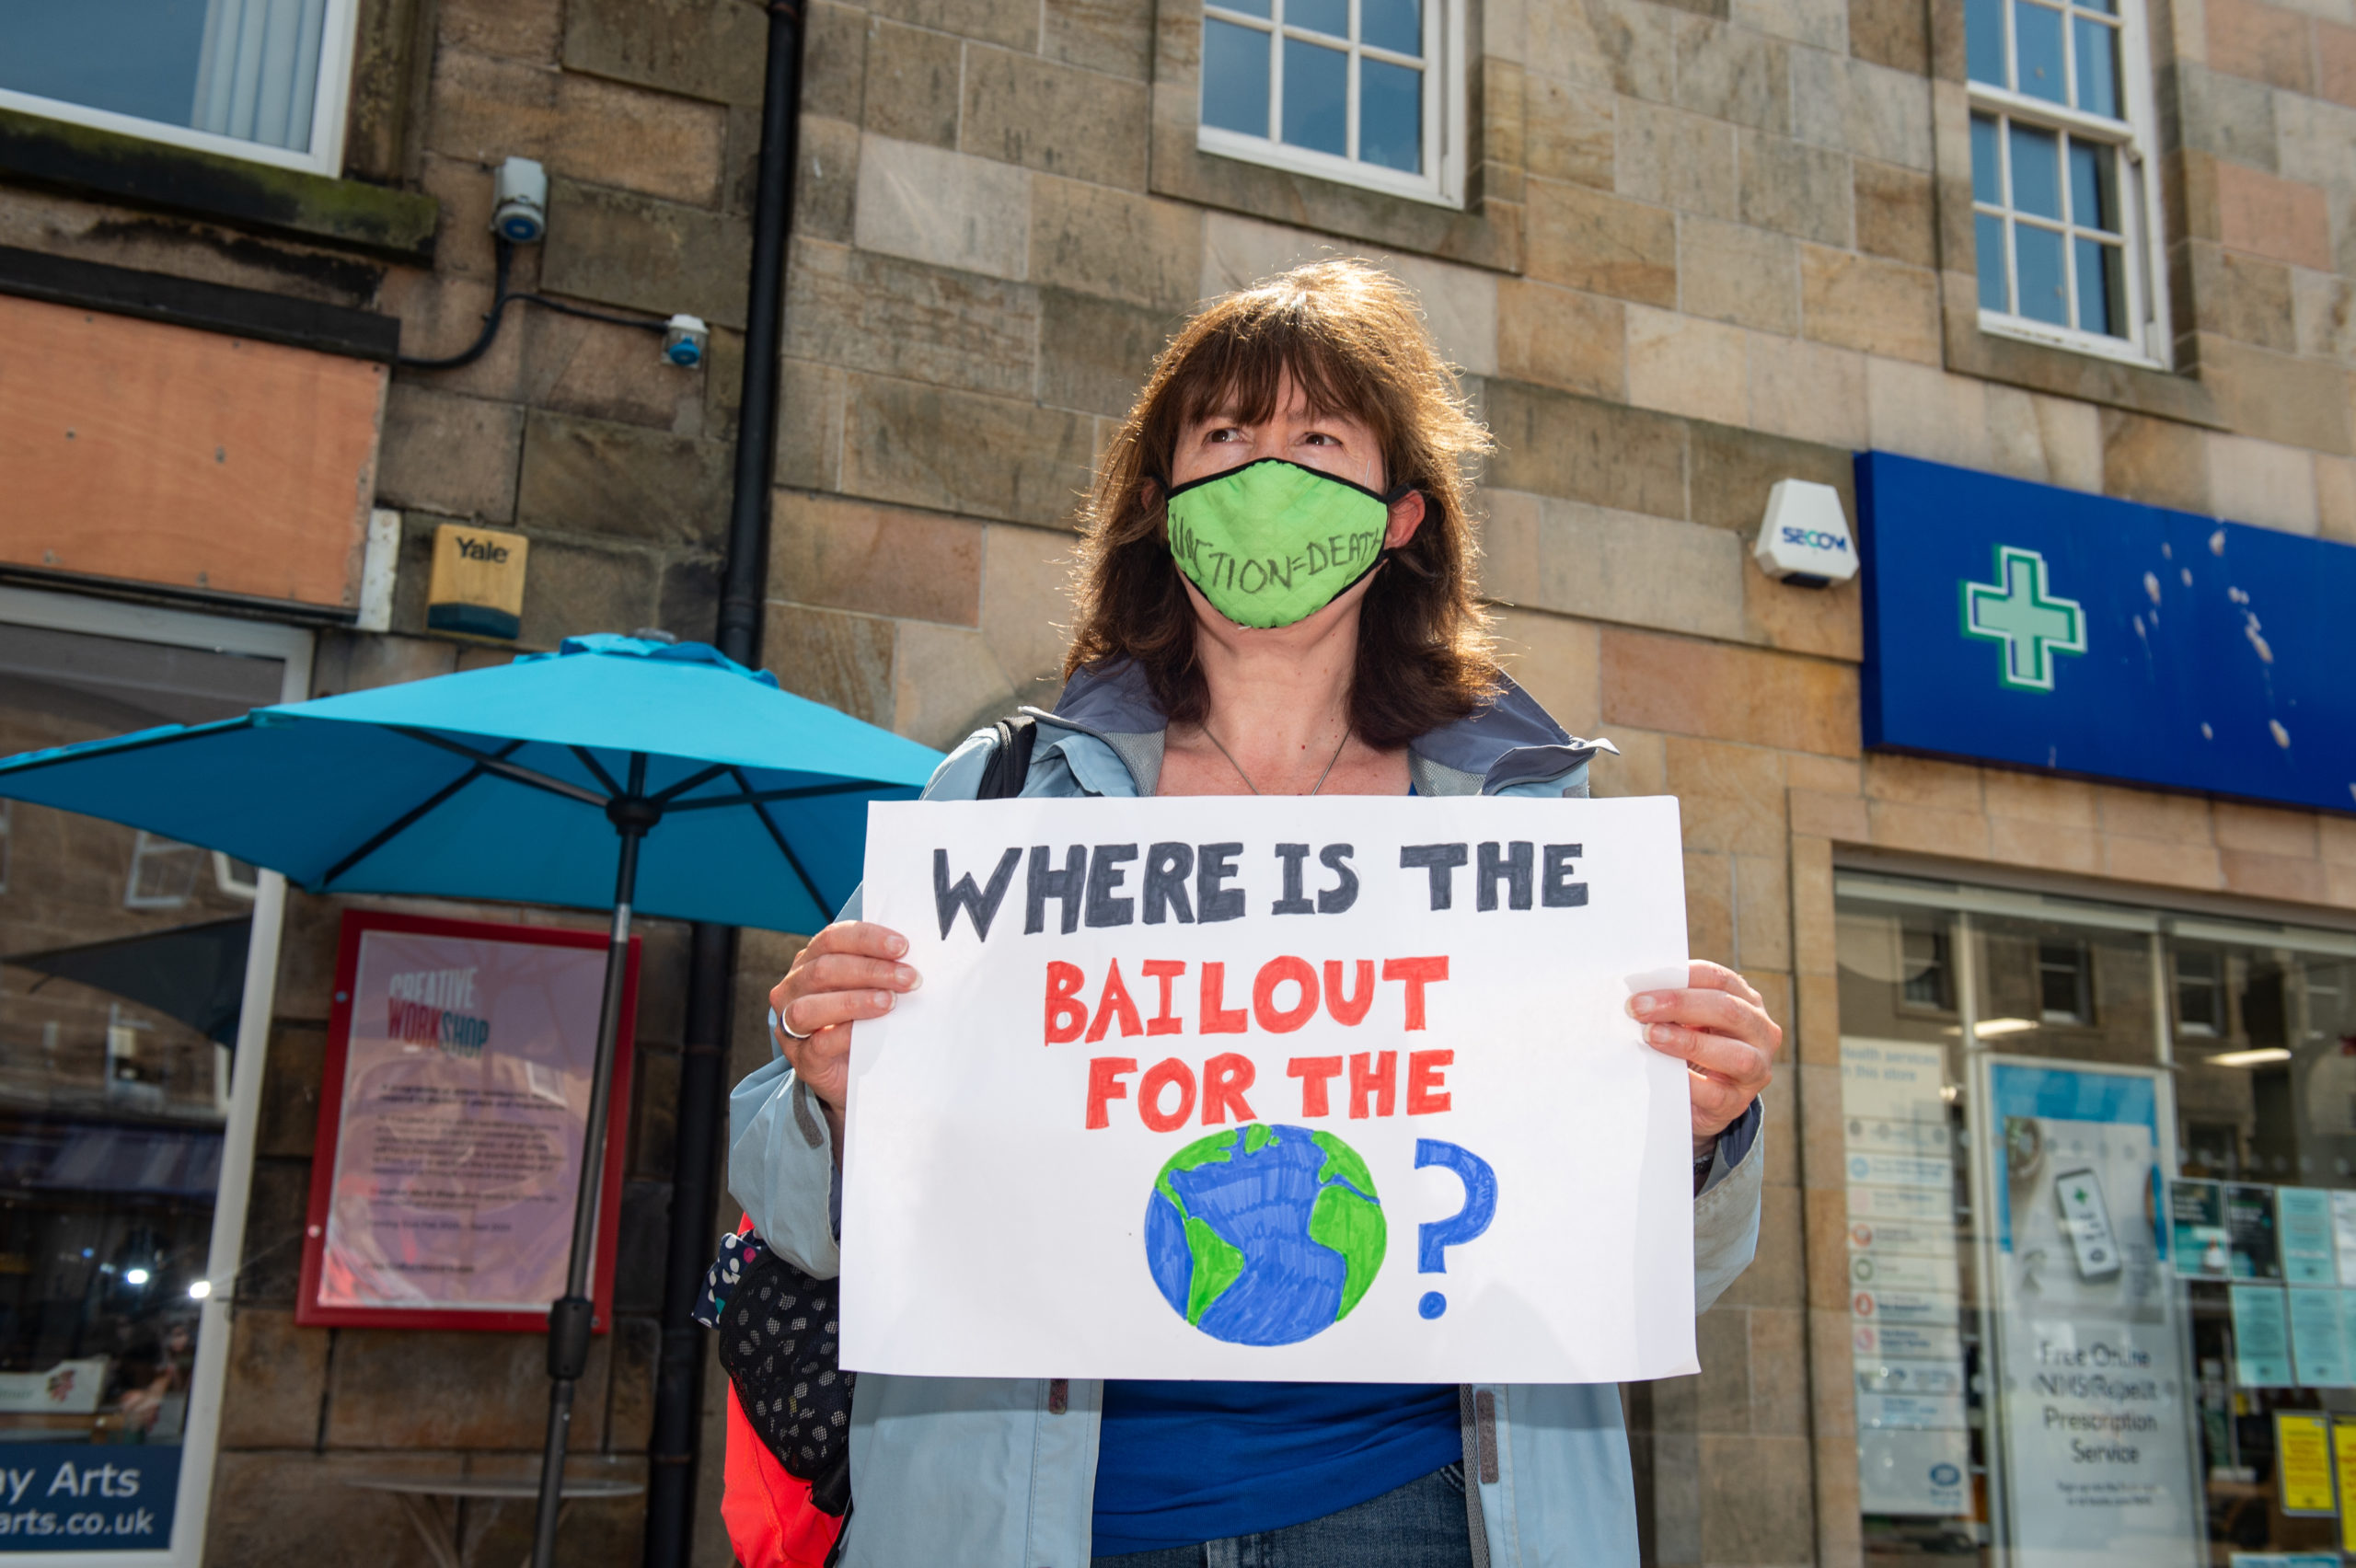 About a dozen campaigners attended the event in Forres town centre.